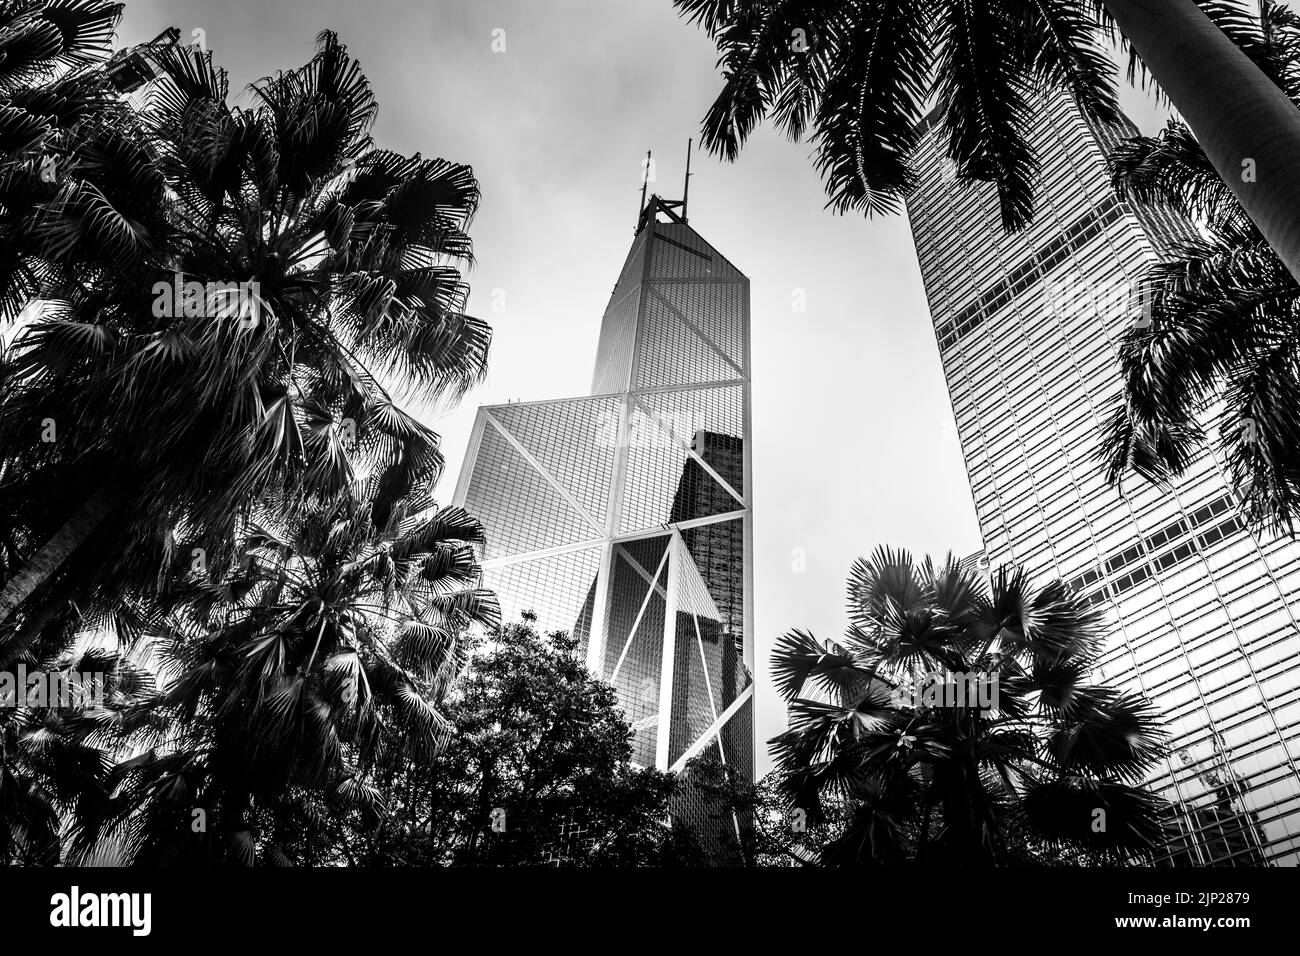 Central Hong Kong sky scraper framed by trees in a park. Stock Photo